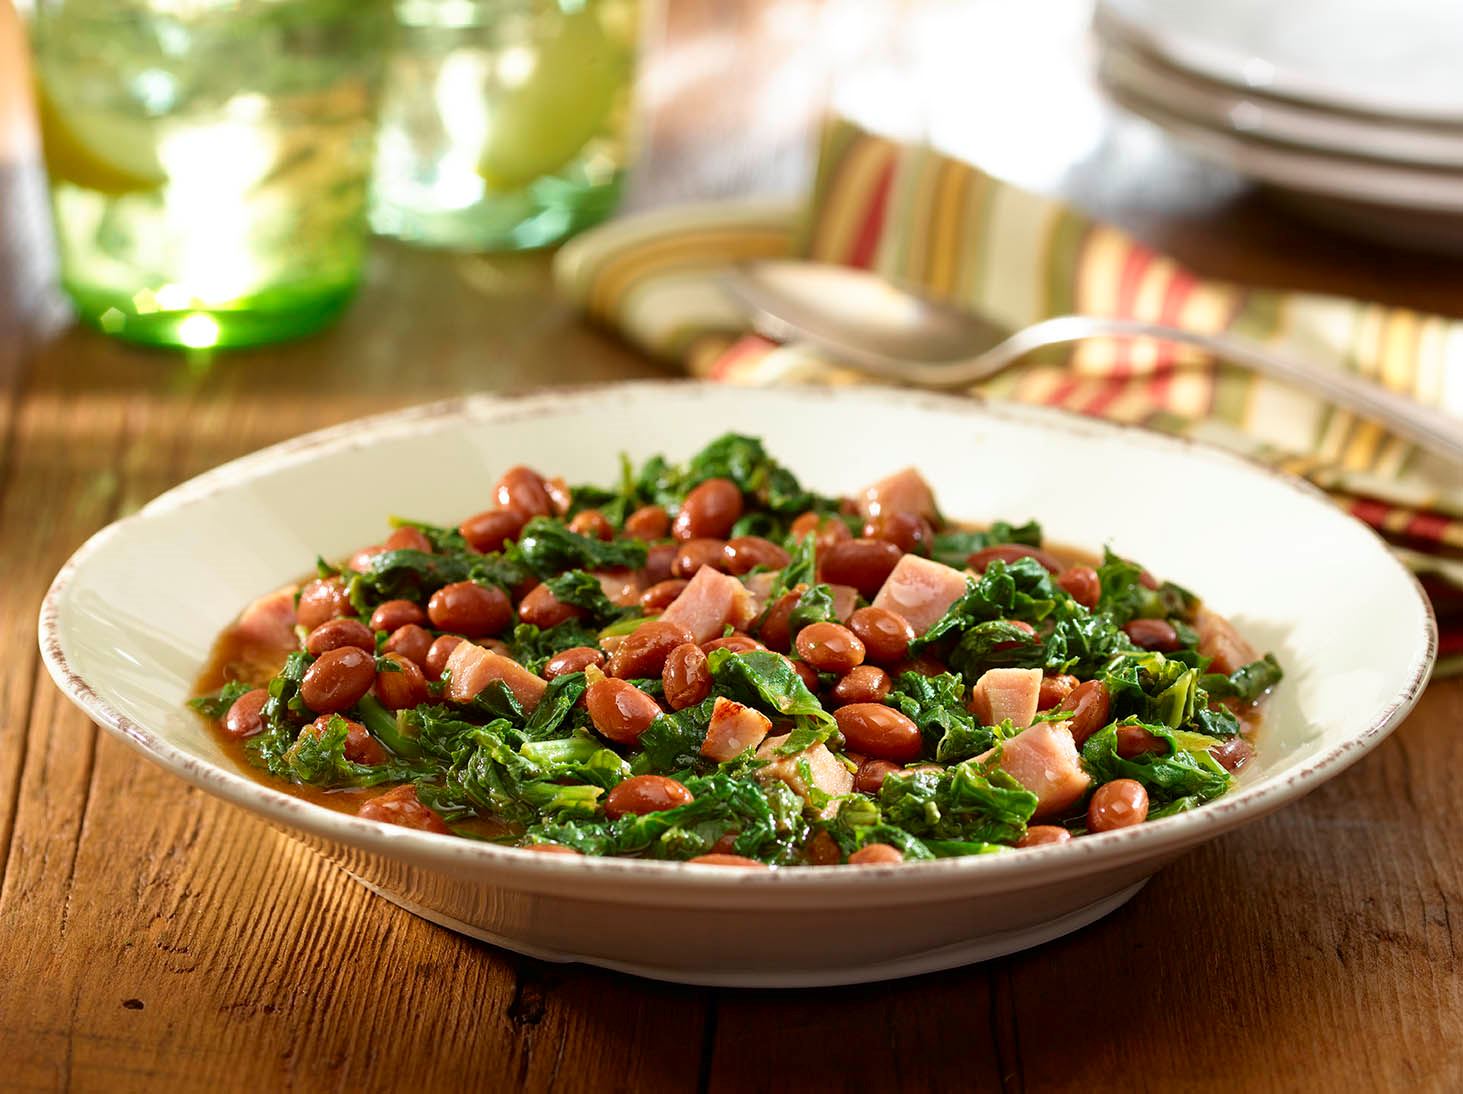 Braised Kale with Pink Beans and Ham